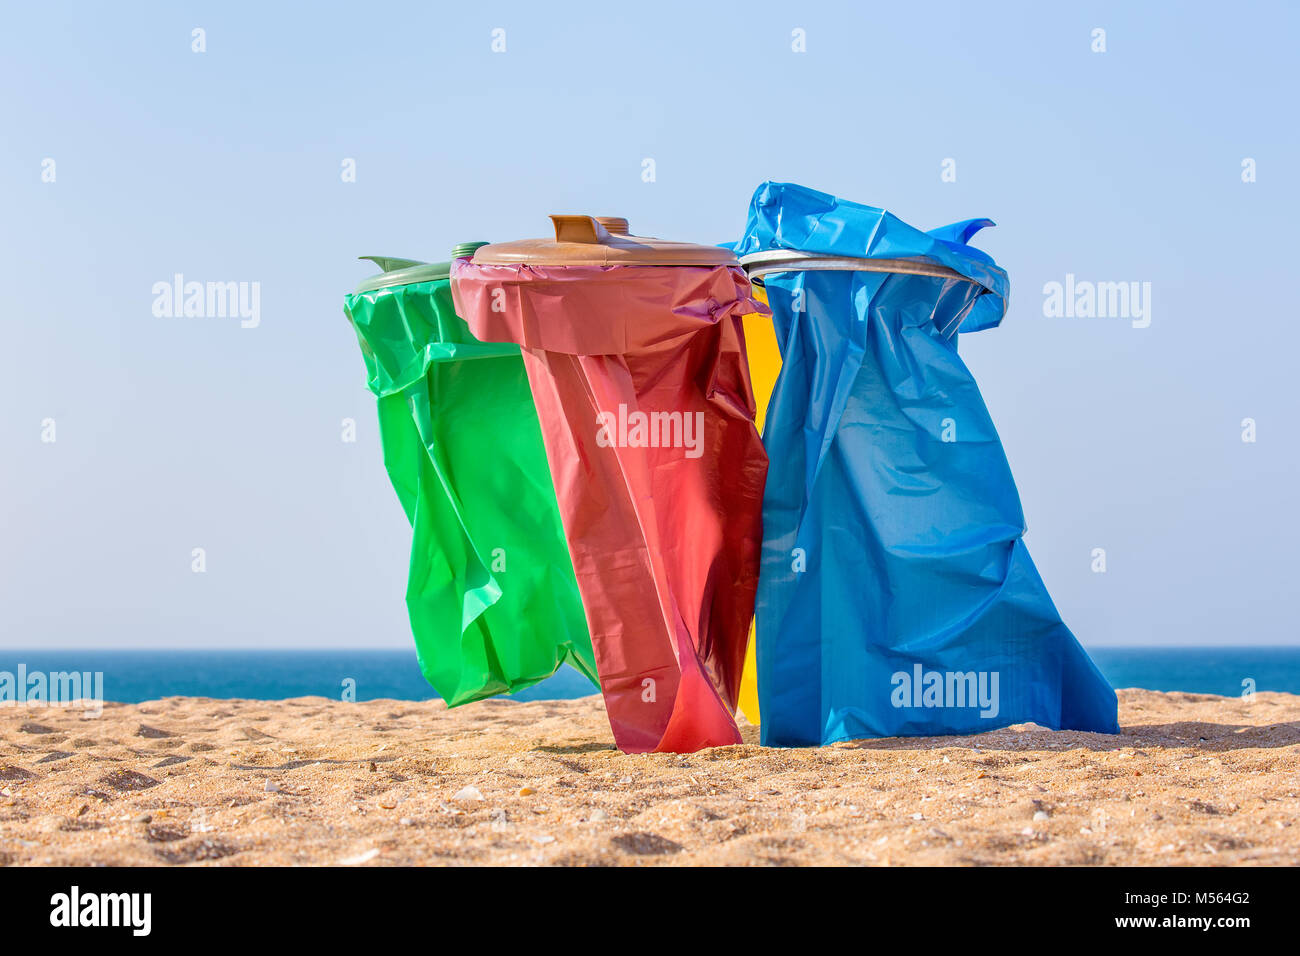 Colorful garbage bags on beach at coast Stock Photo